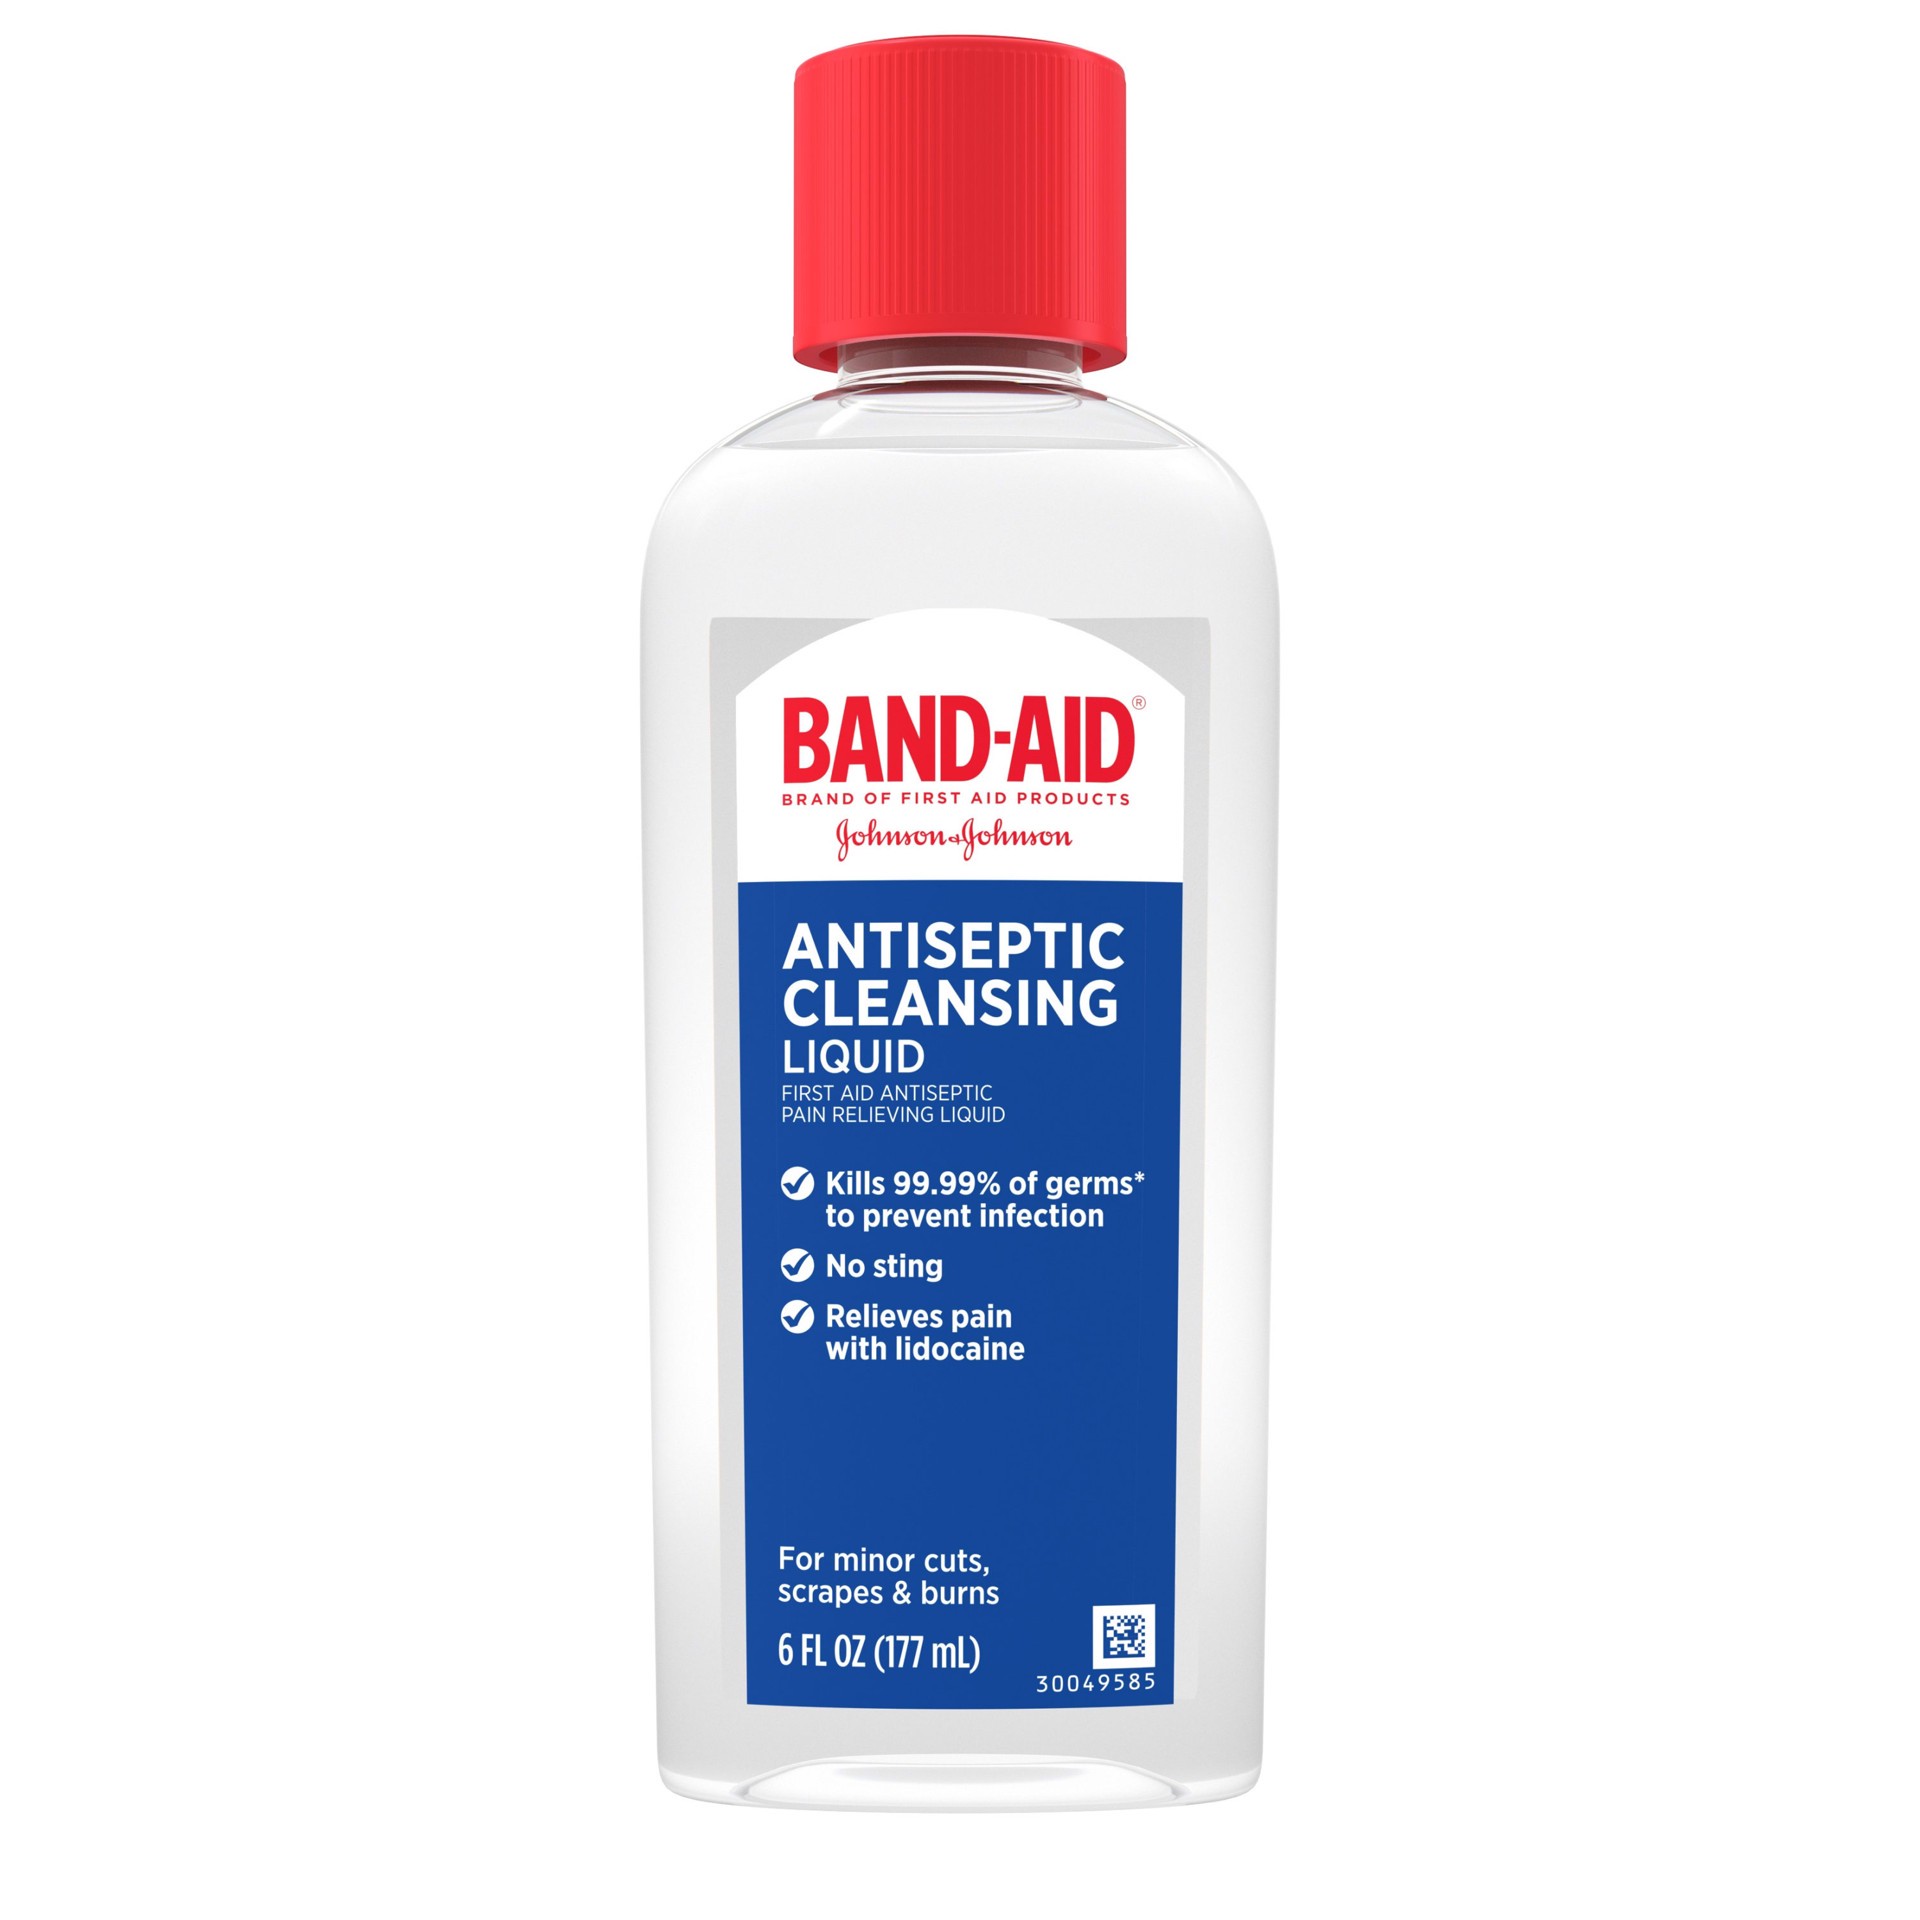 slide 1 of 7, BAND-AID Antiseptic Cleansing Liquid, First Aid Antiseptic Wash Relieves Pain & Kills Germs, with Benzalkonium Cl Wound Antiseptic & Lidocaine HCl Topical Analgesic, 6 fl. oz, 6 fl oz